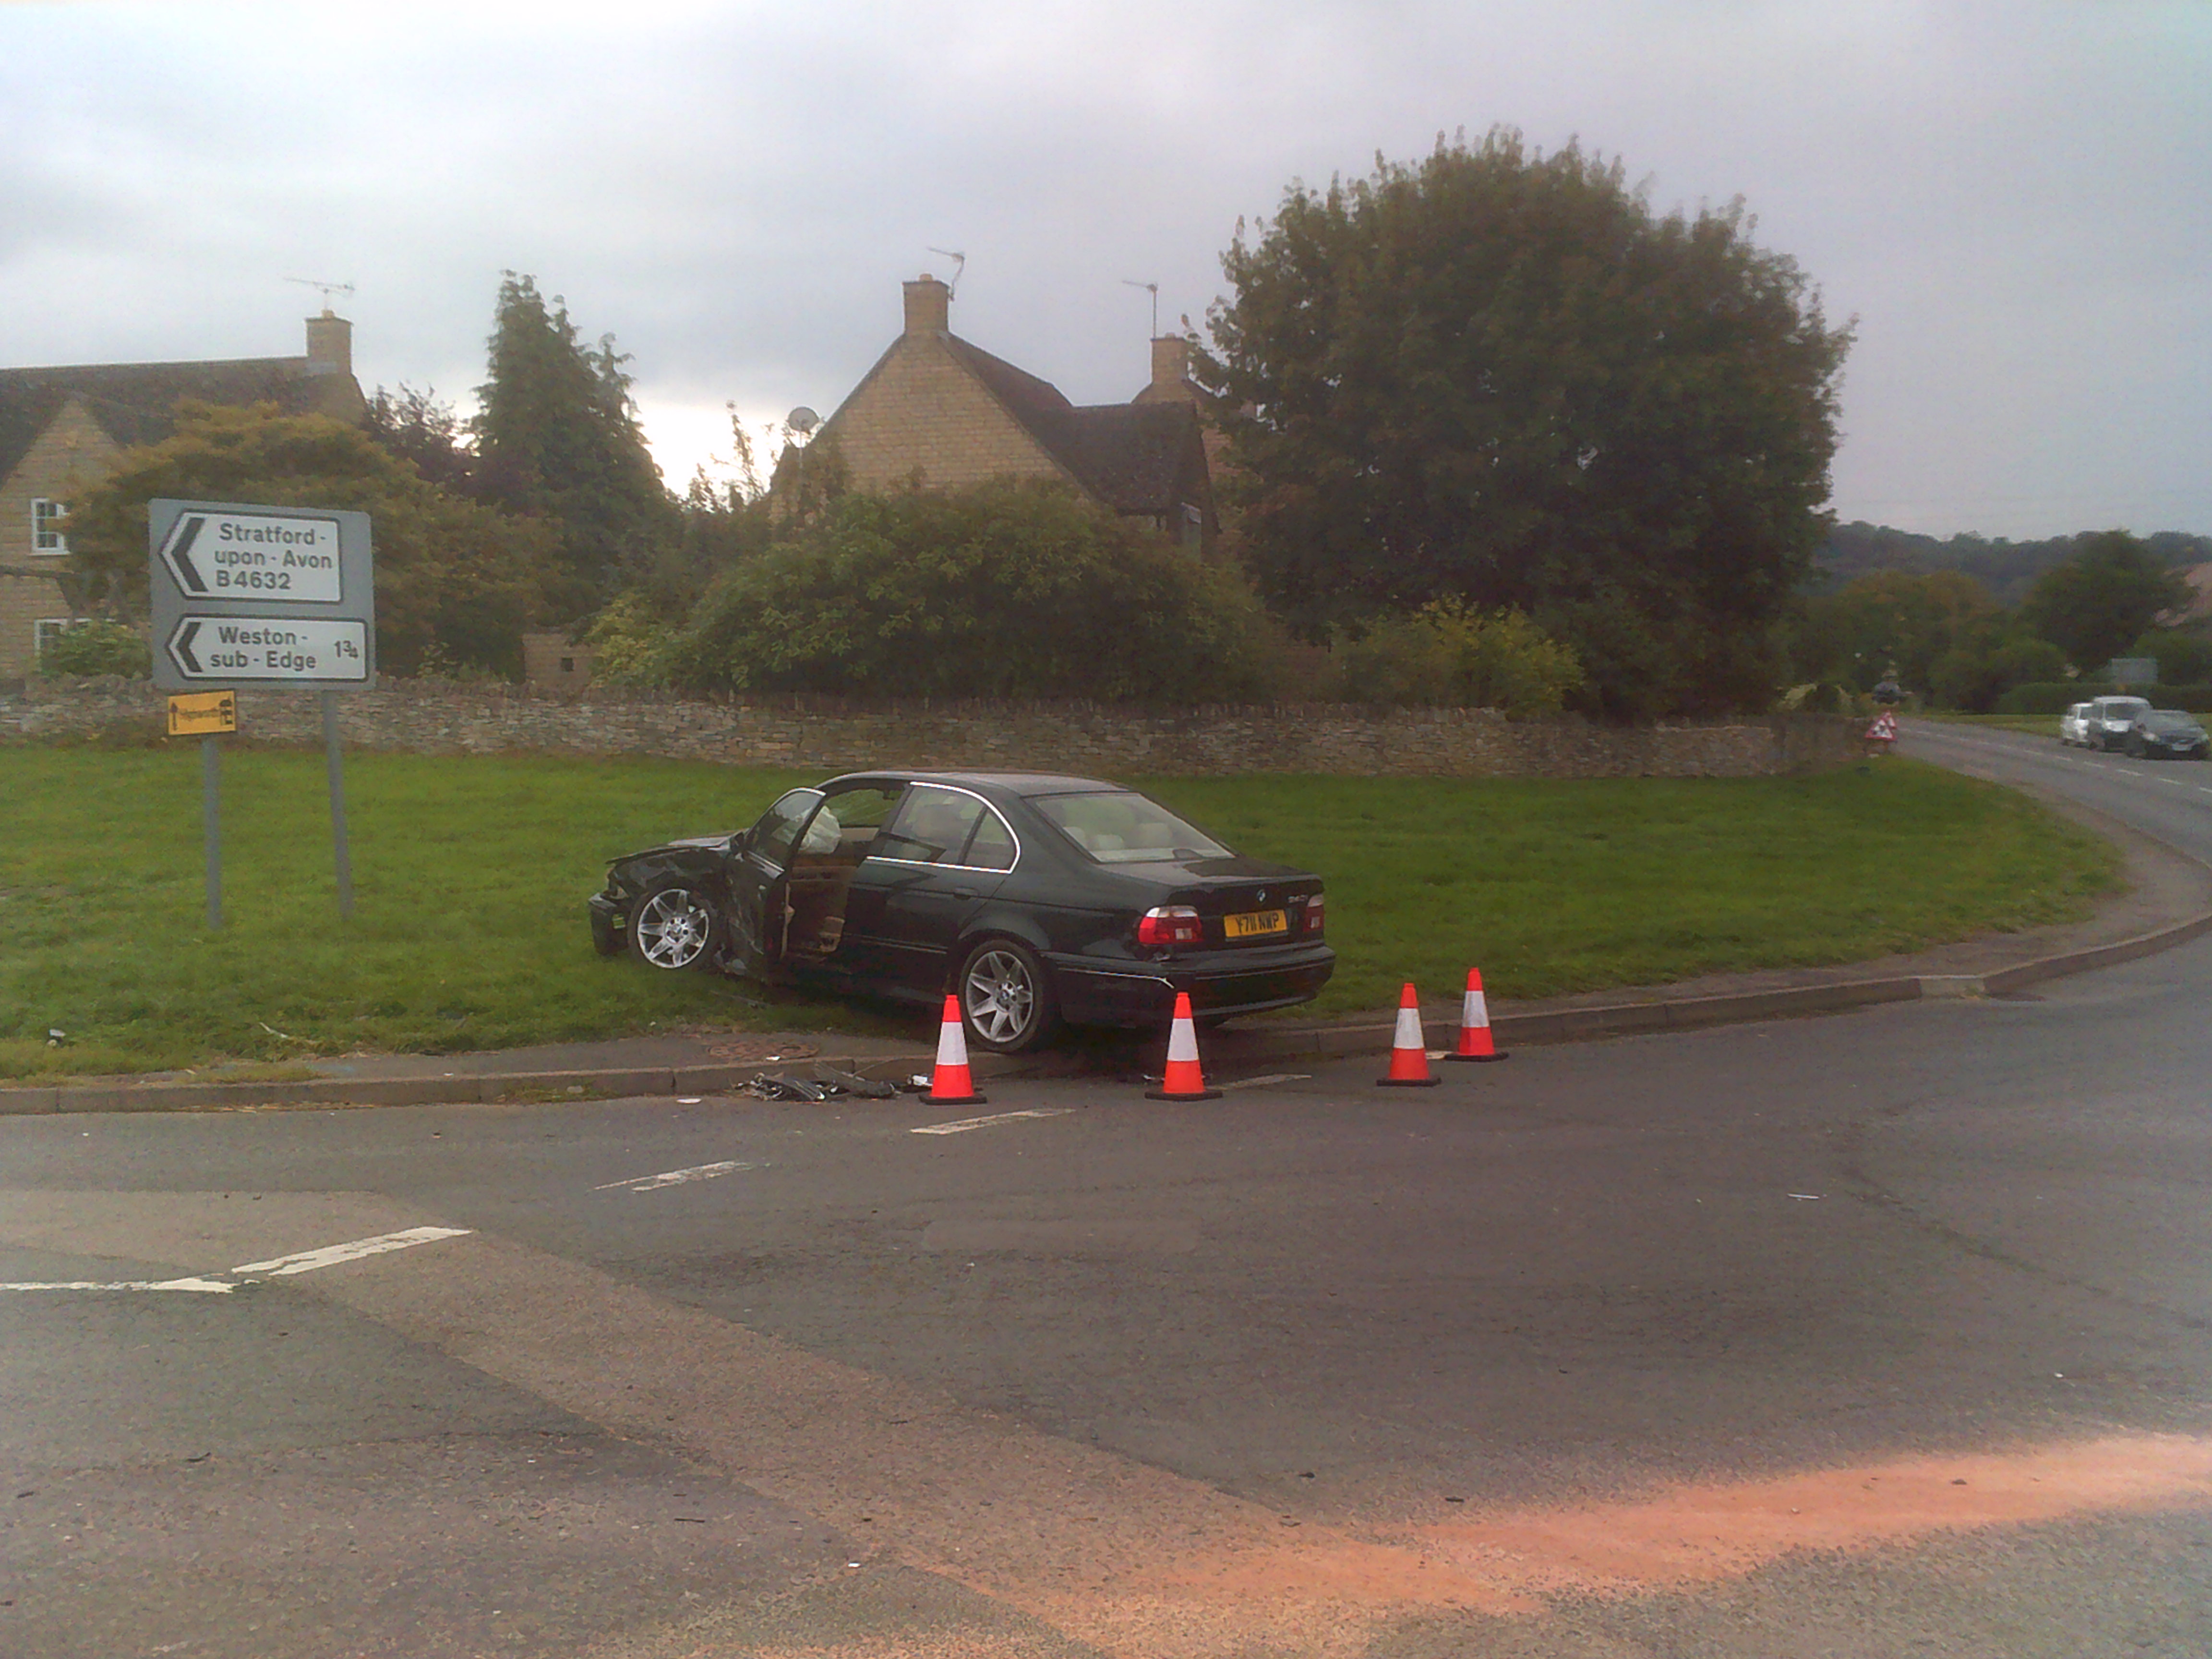 Wrecked car at Pike Roundabout in Willersey.